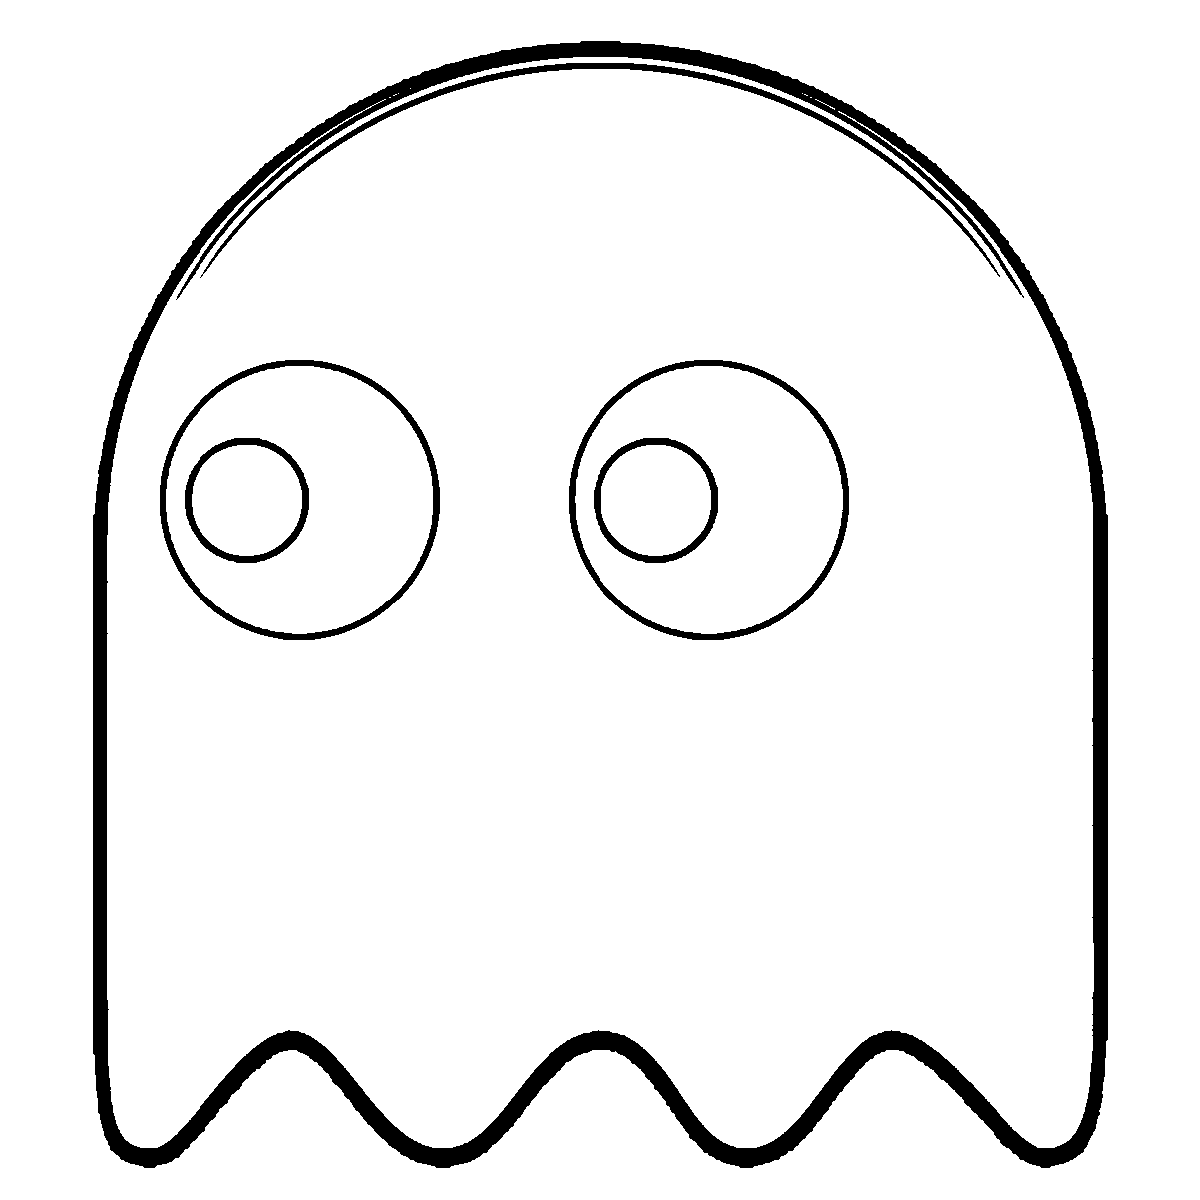 Pacman Coloring Pages Ghostly 1980 | Educative Printable | Coloring pages,  Cartoon coloring pages, Pacman